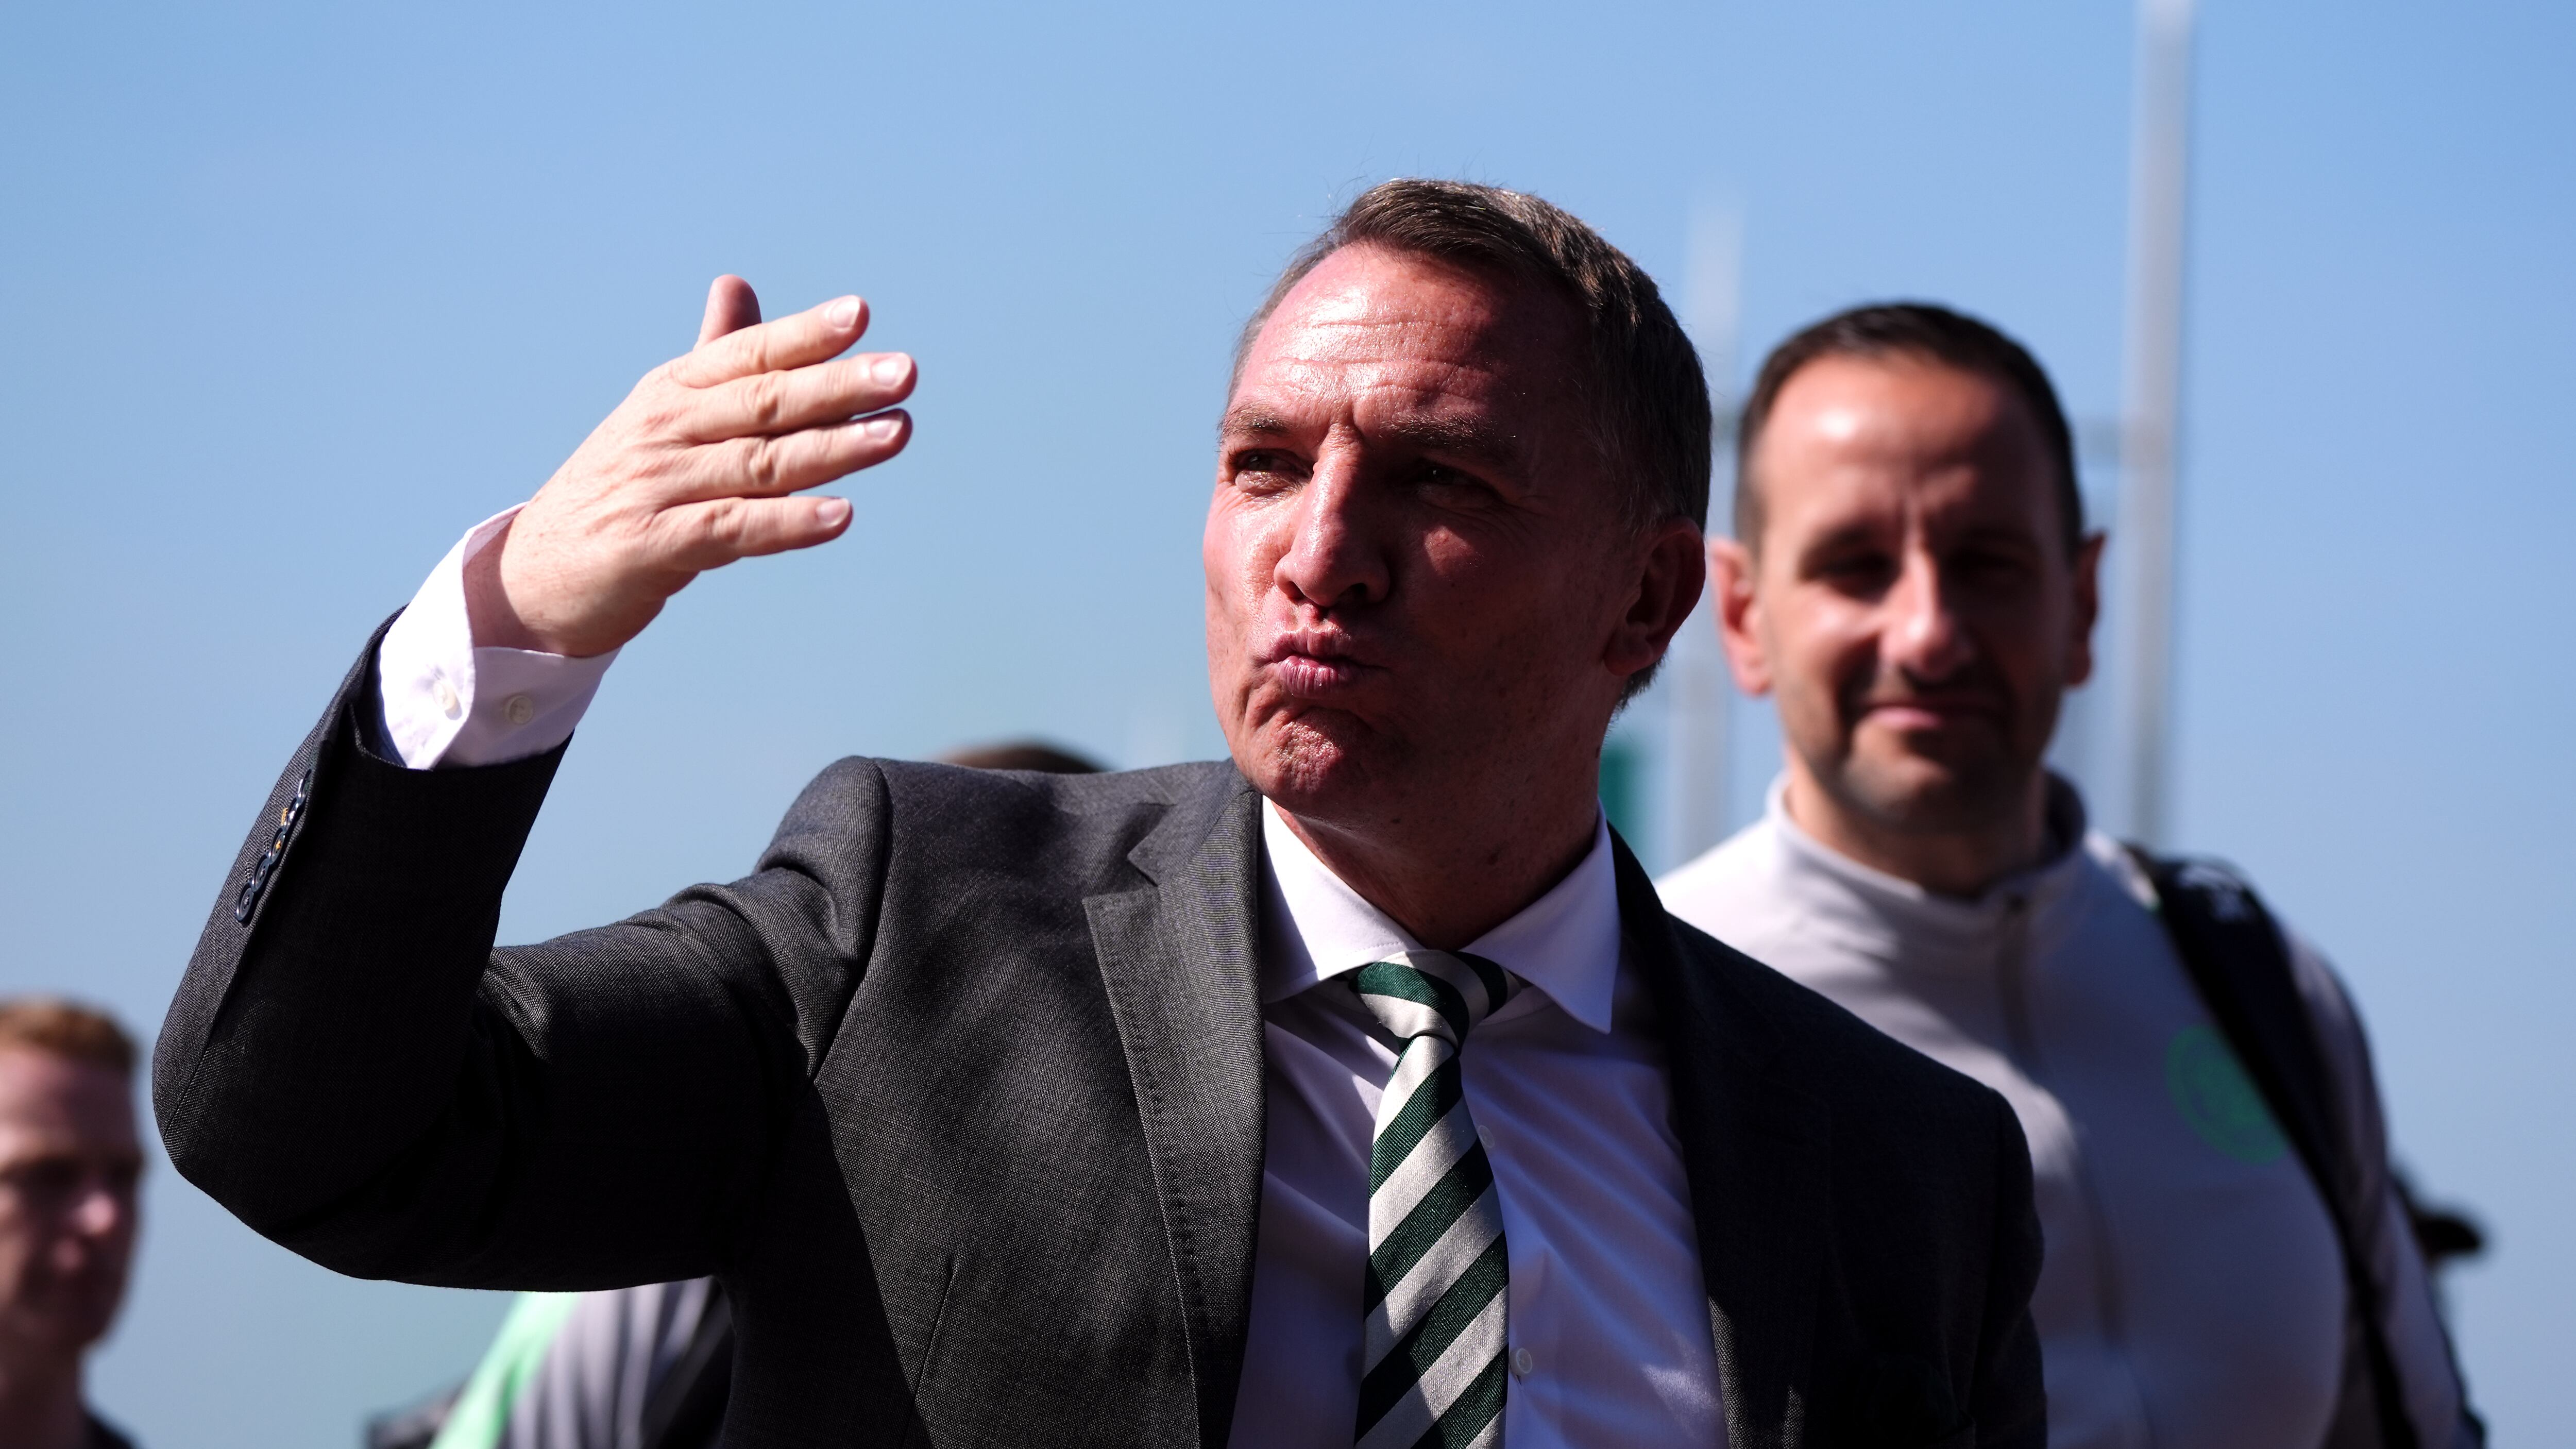 Celtic manager Brendan Rodgers will be looking to continue his impressive record against Rangers